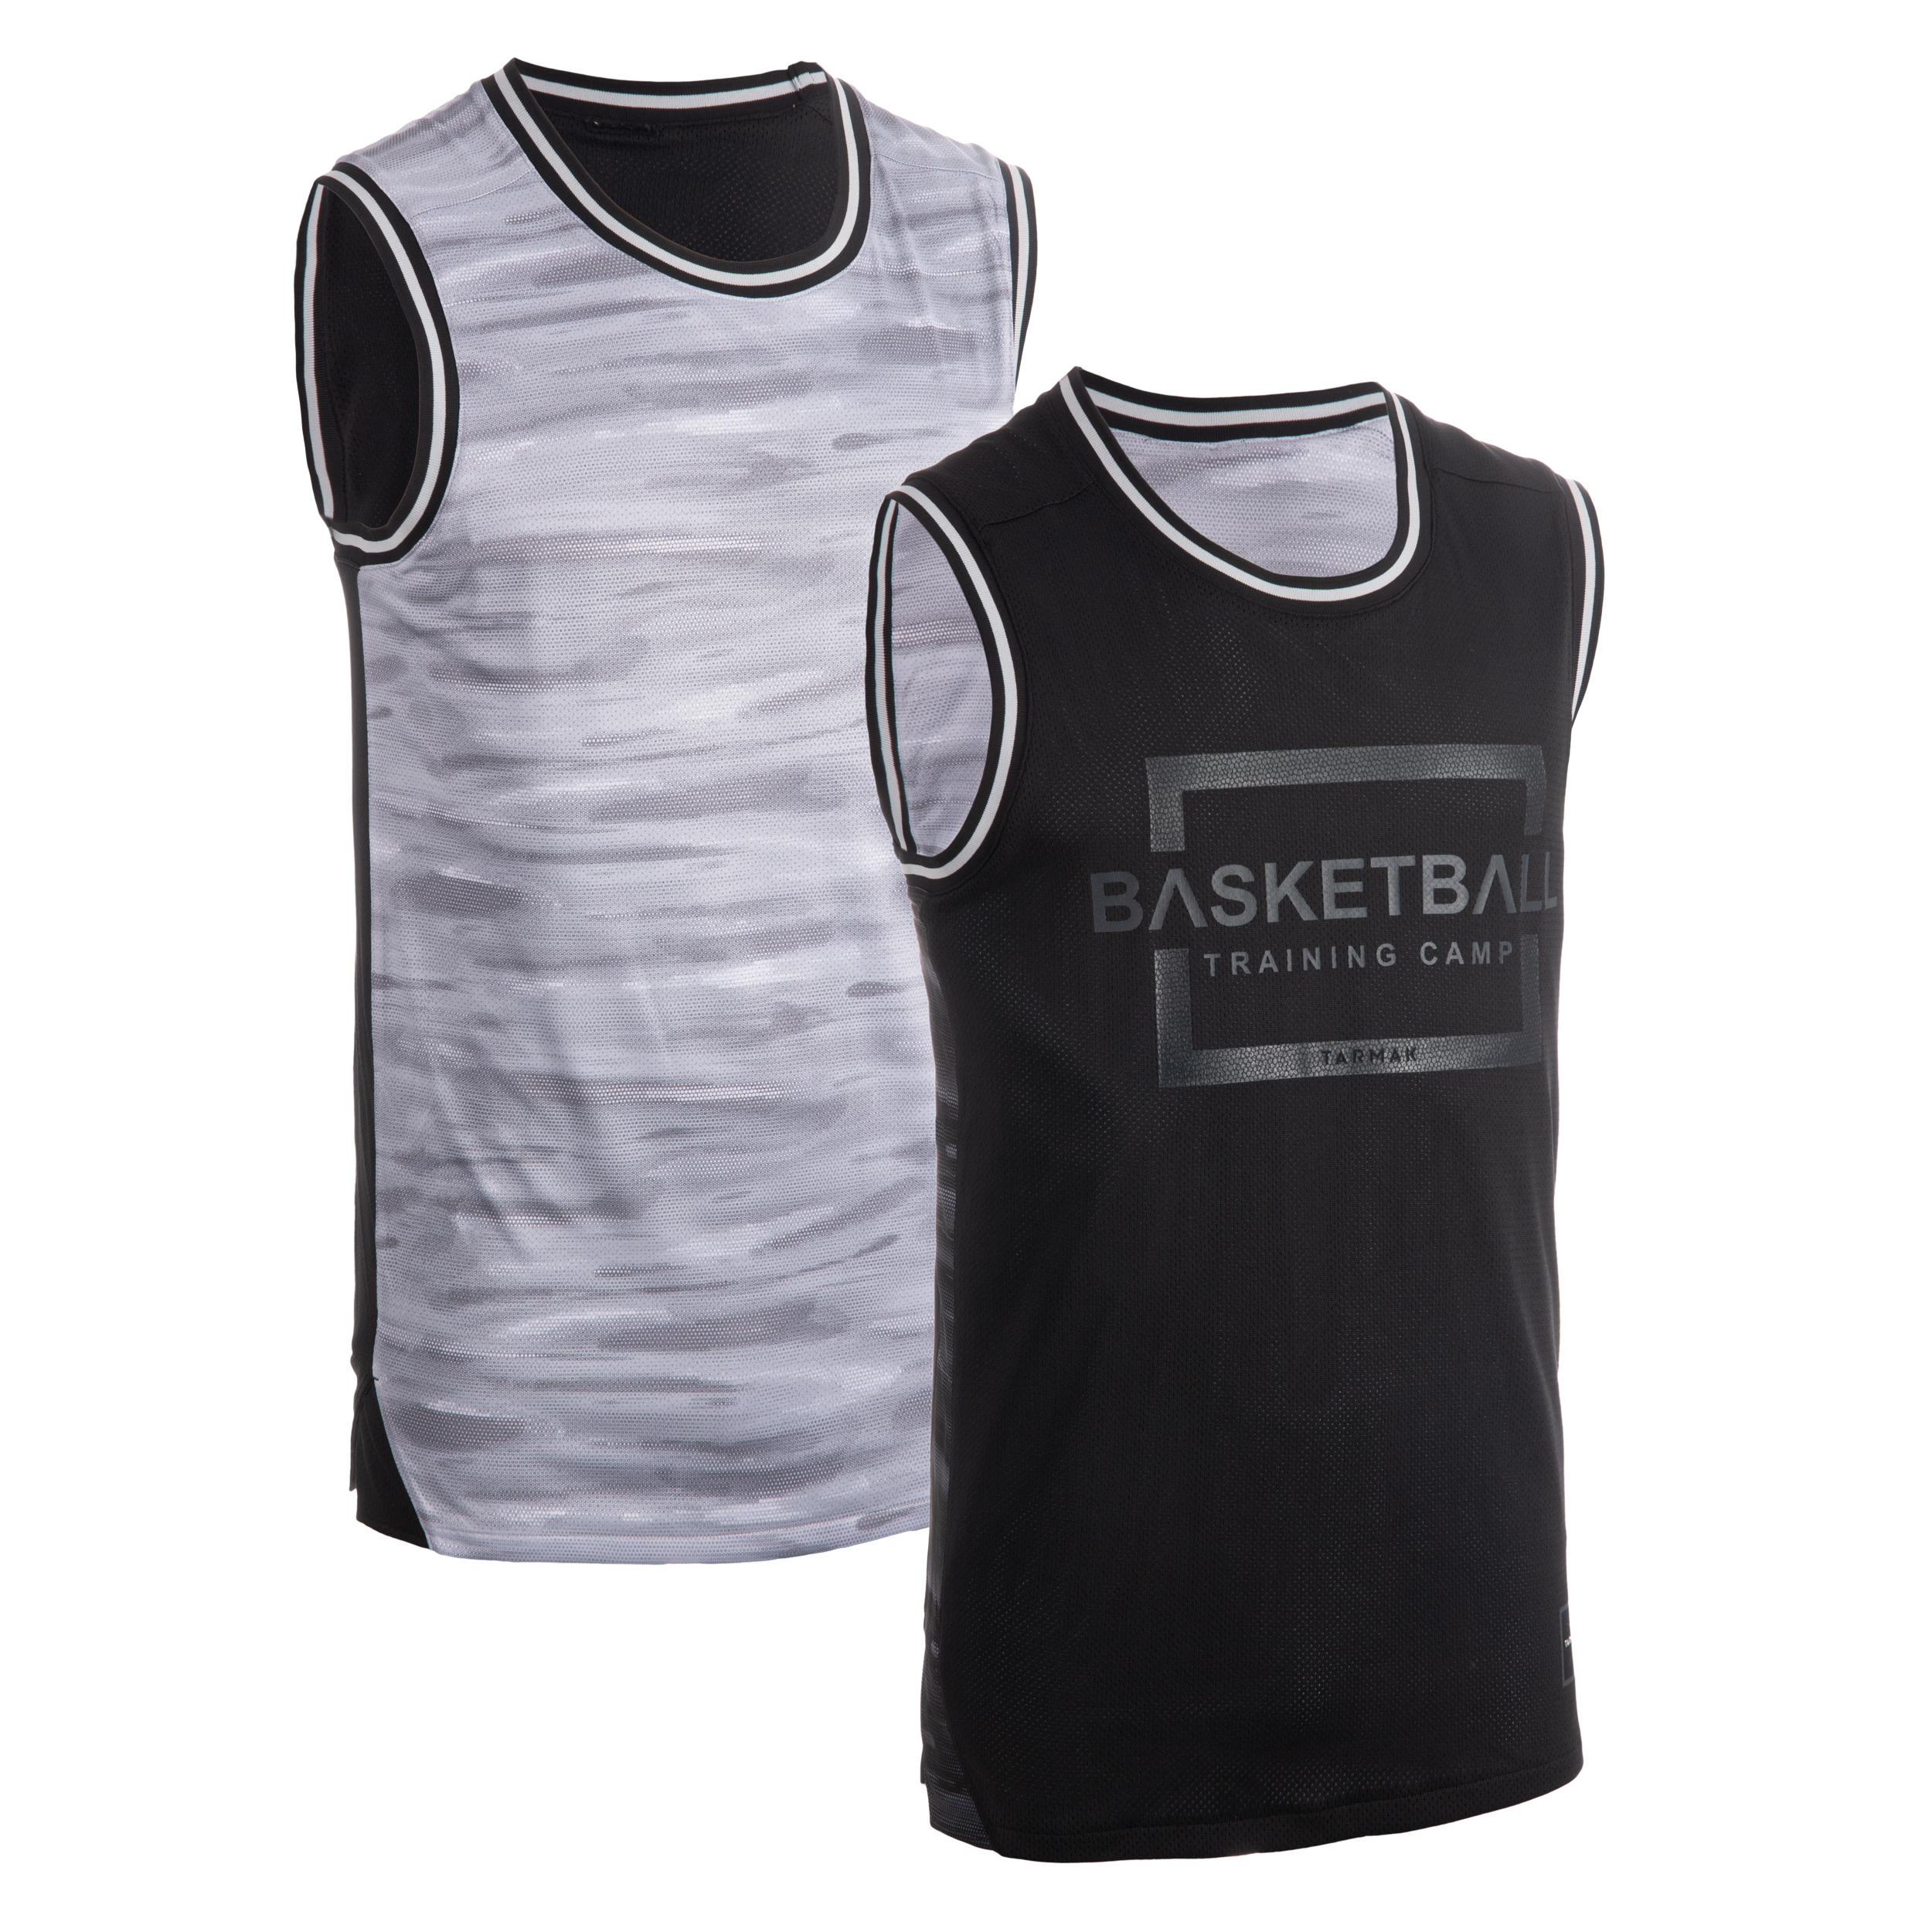 basketball jersey grey color